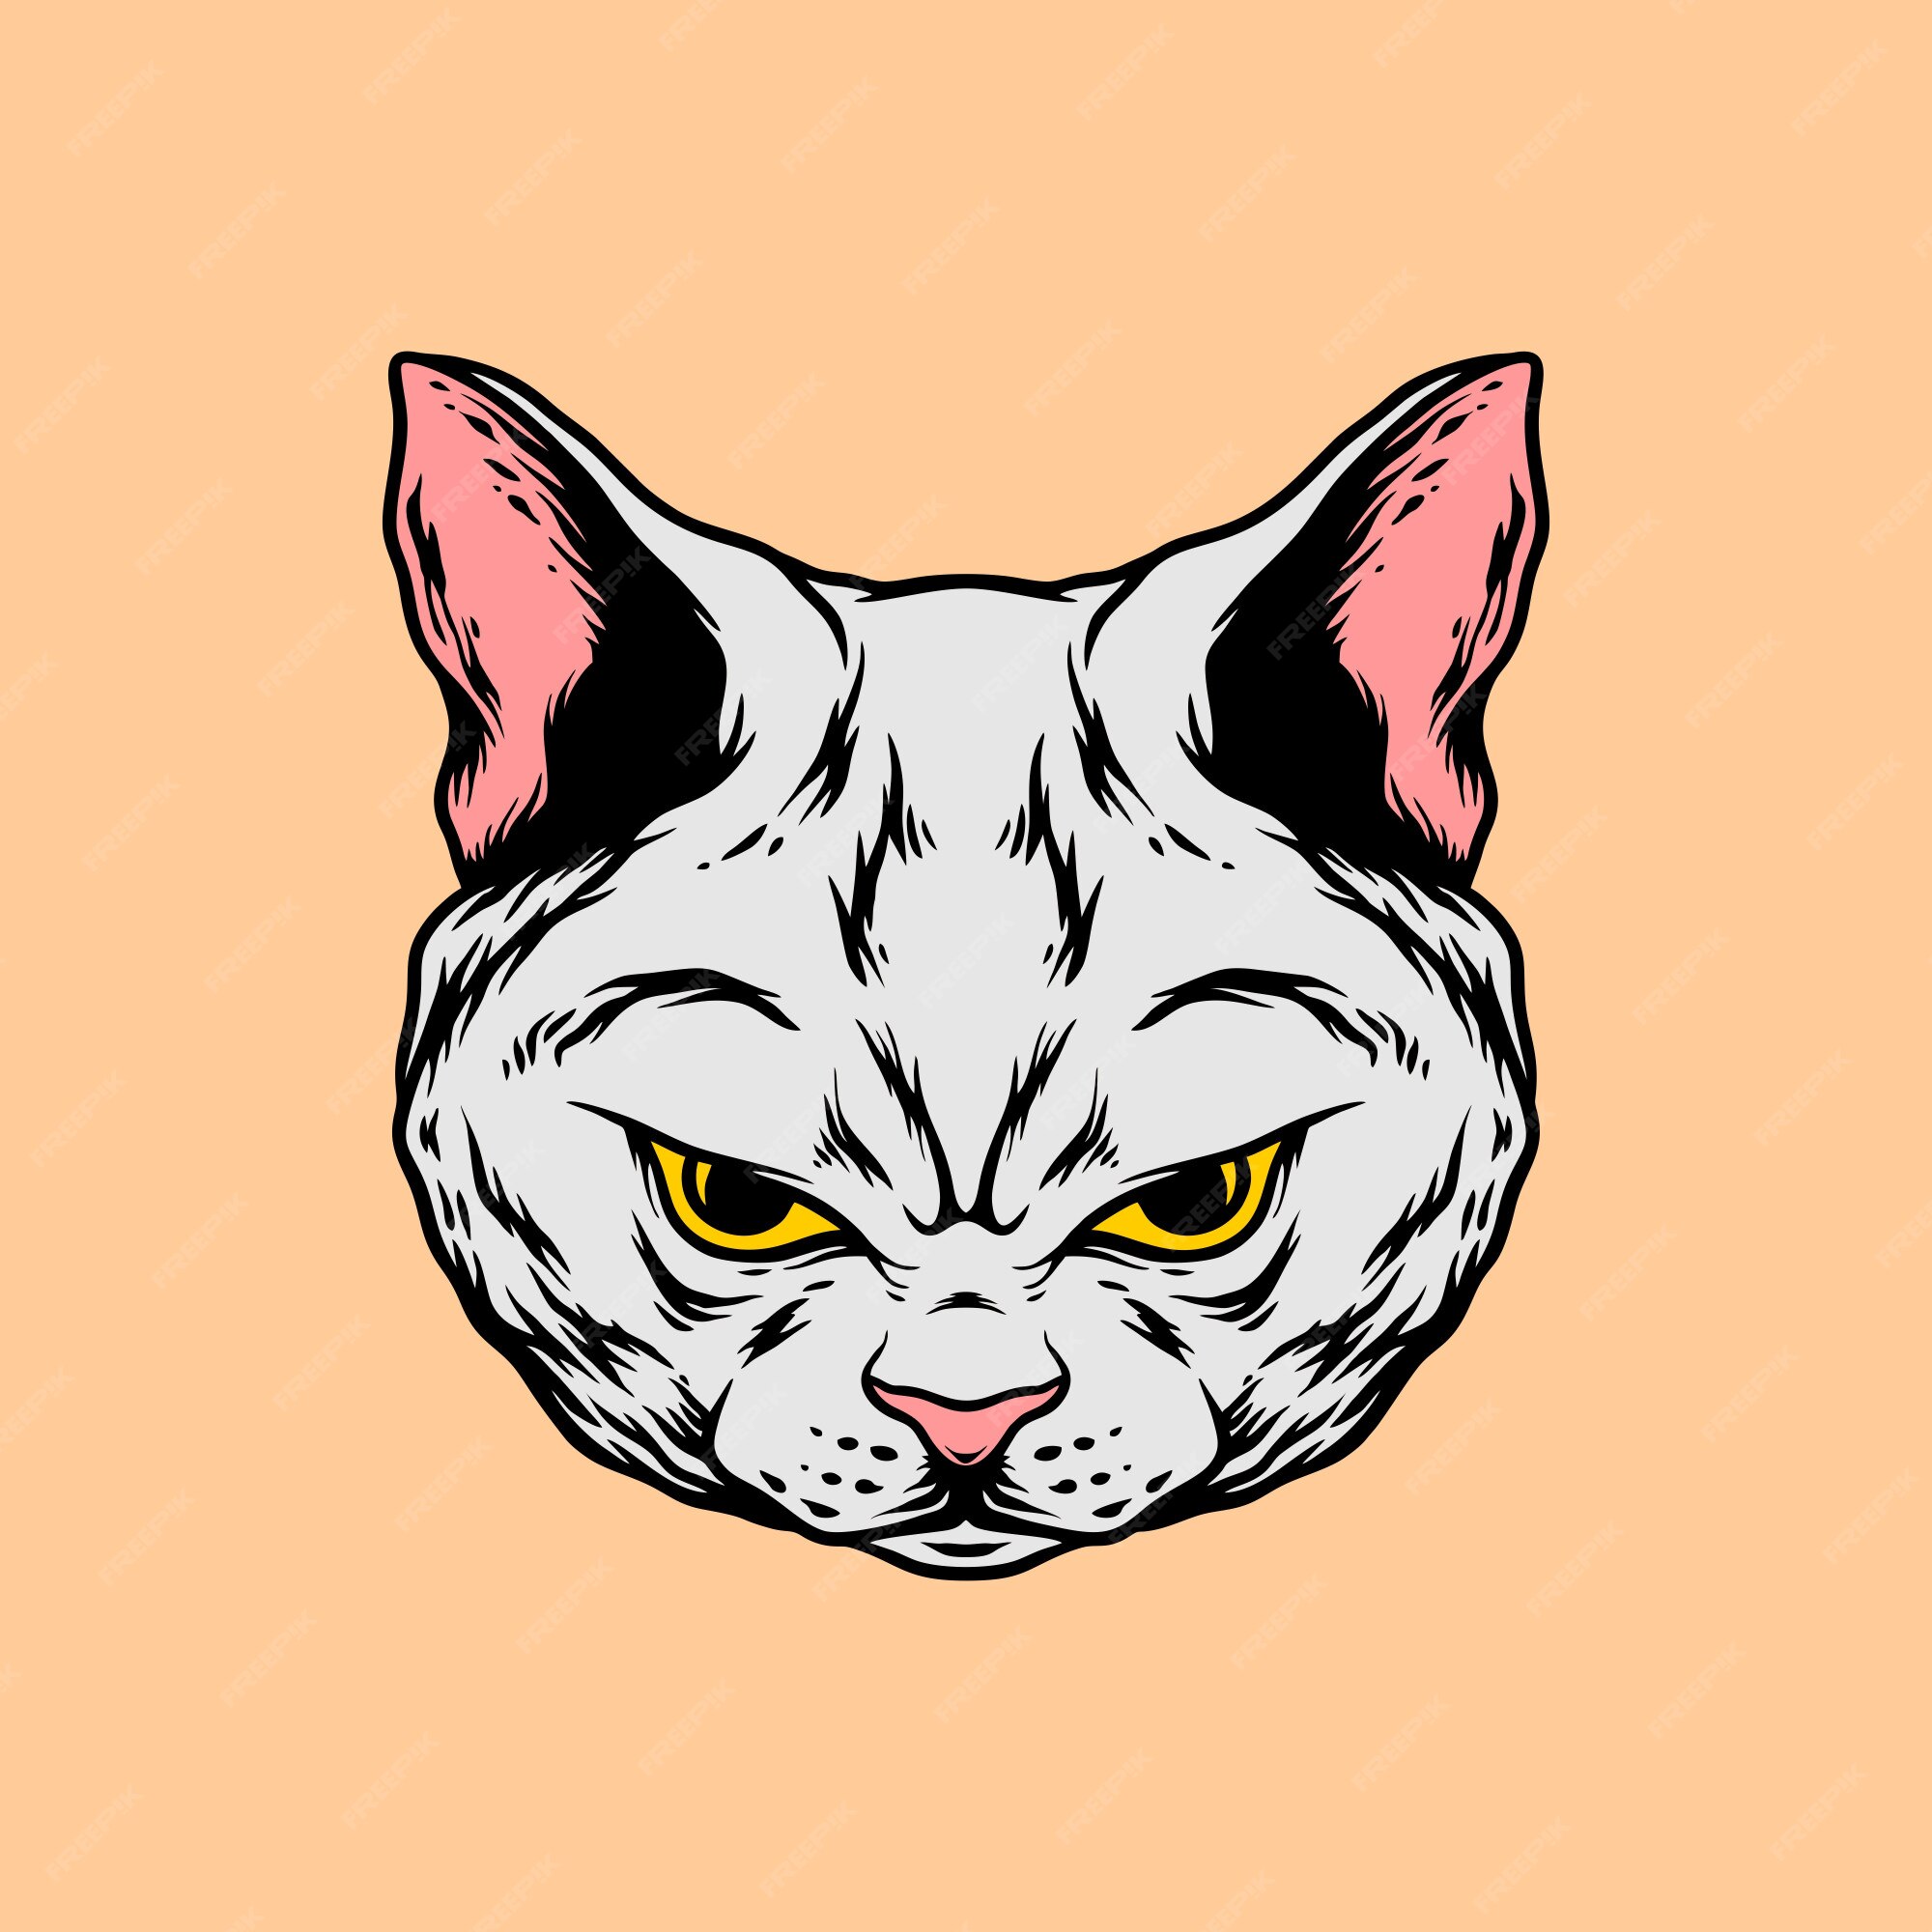 Angry Cat Images - Free Download on Freepik